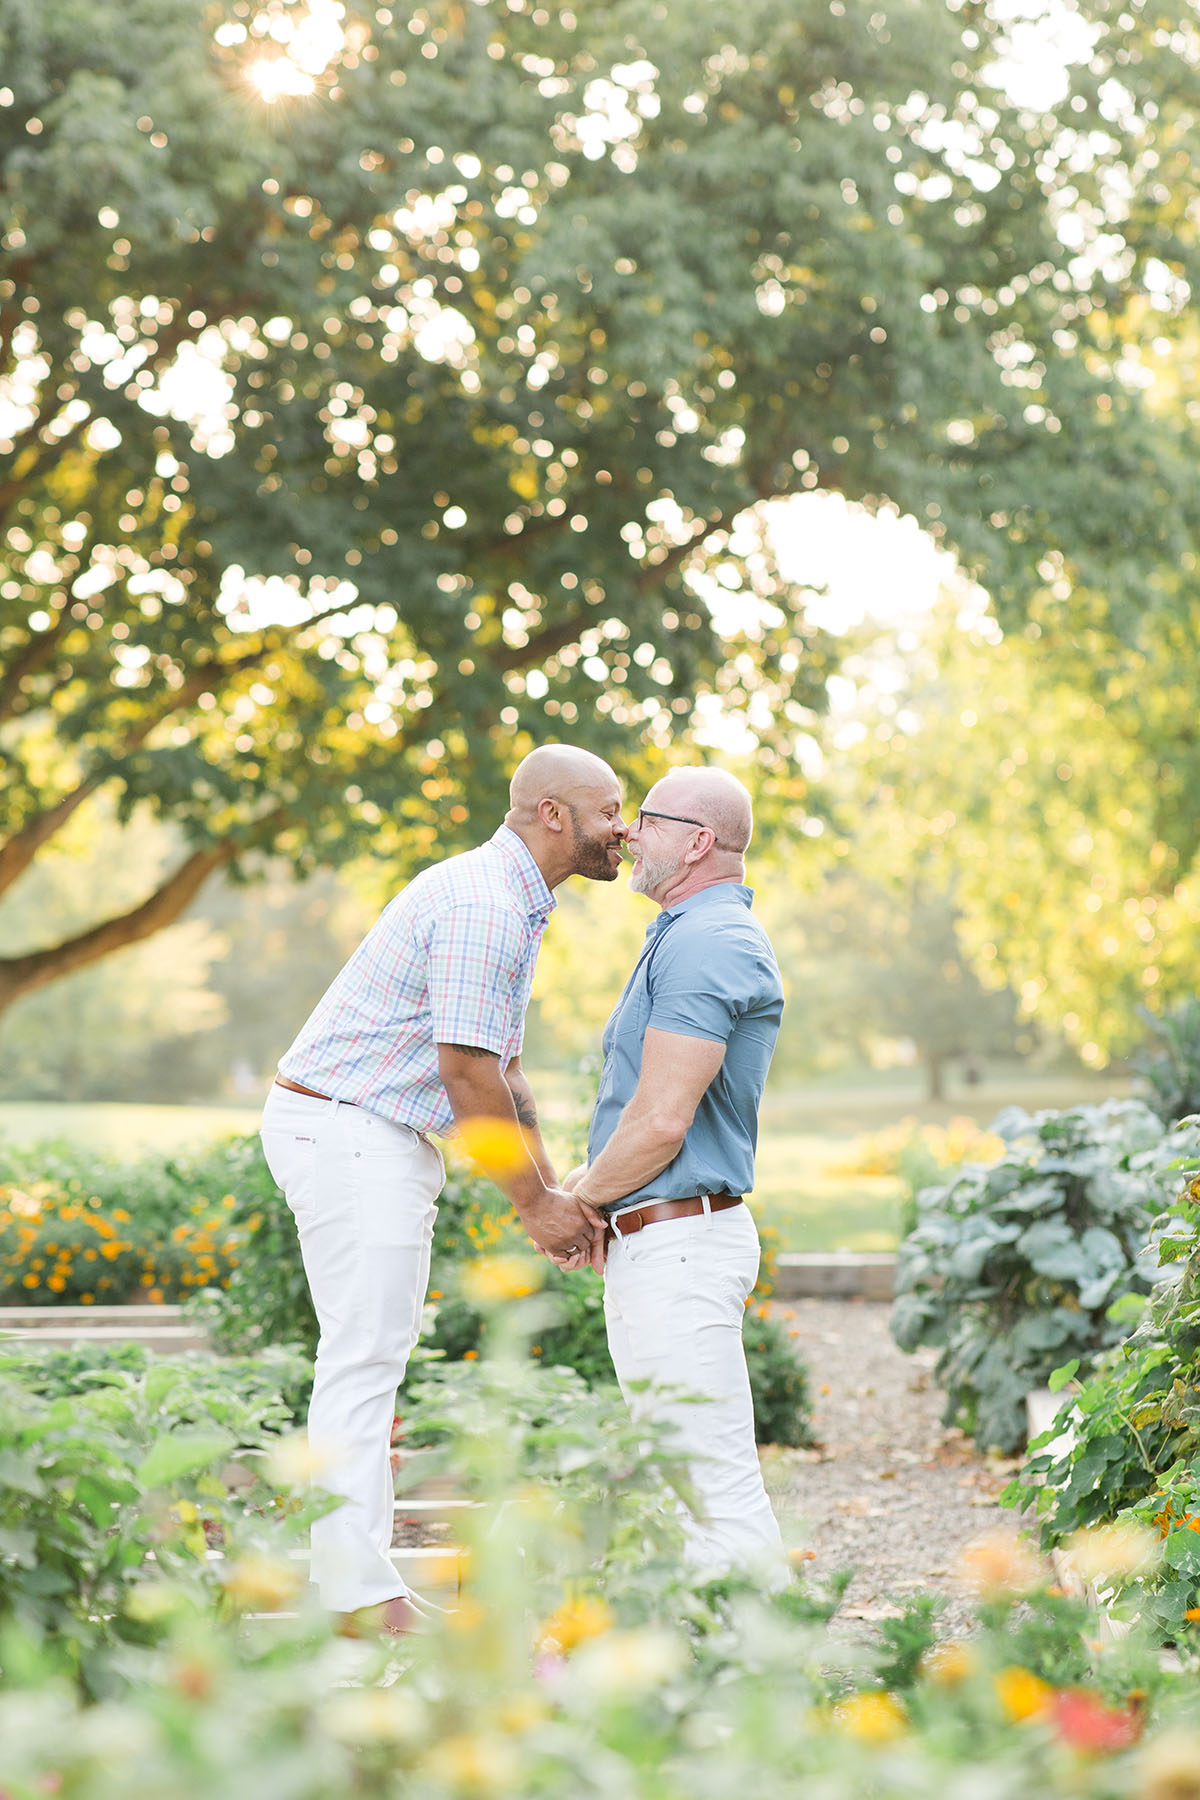 Garden engagement photos at the Franklin Park Conservatory LGBTQ+ weddings two grooms engagement gay outdoors nature kiss